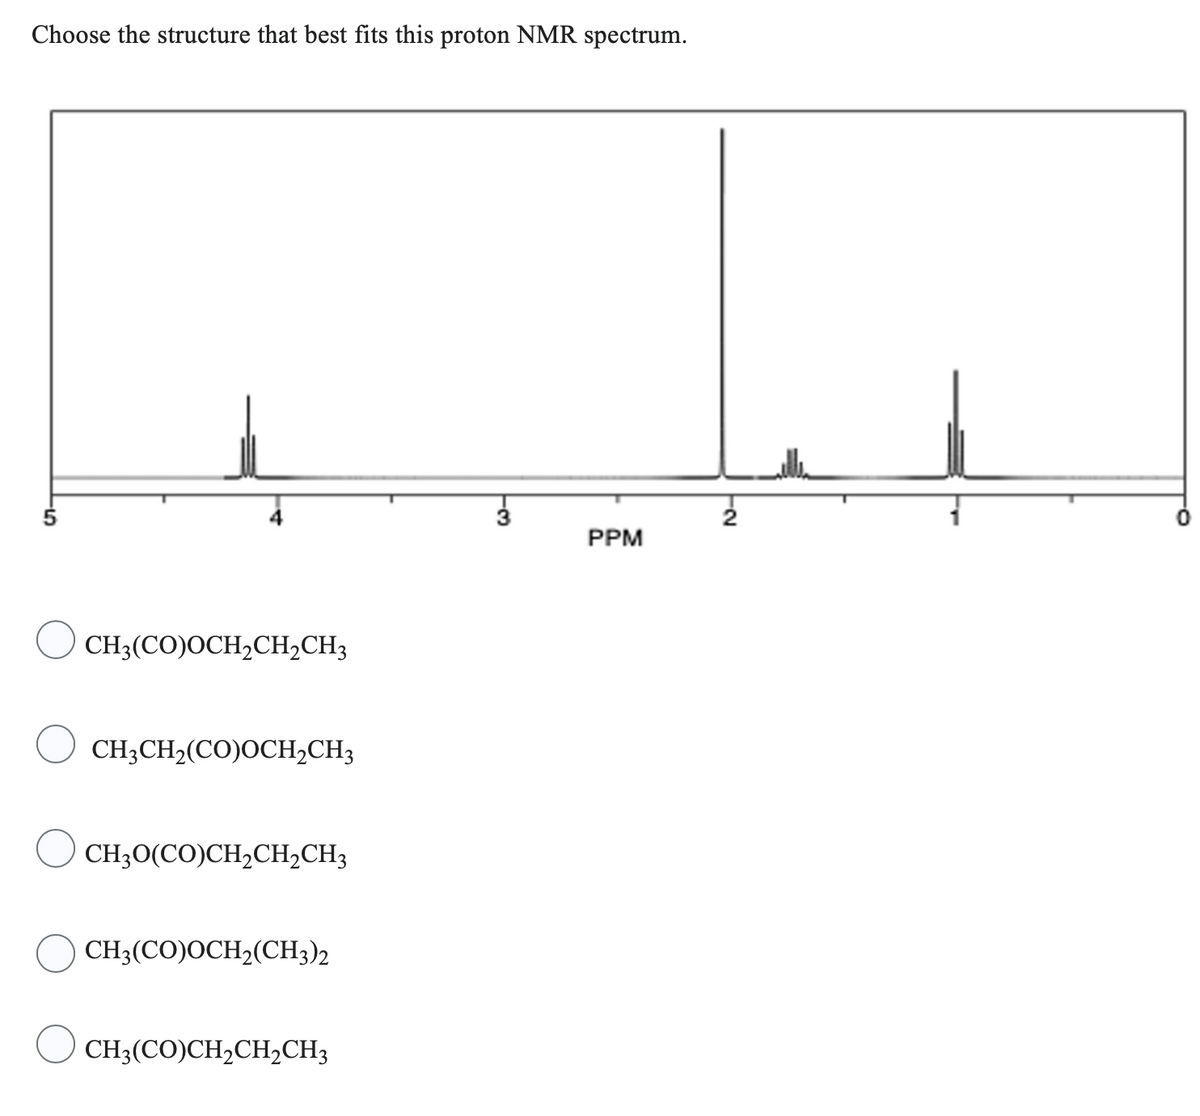 Choose the structure that best fits this proton NMR spectrum.
CH3(CO)OCH₂CH₂CH3
CH3CH₂(CO)OCH₂CH3
CH3O(CO)CH₂CH₂CH3
CH3(CO)OCH₂(CH3)2
CH,(CO)CH,CH,CH,
PPM
ta
0